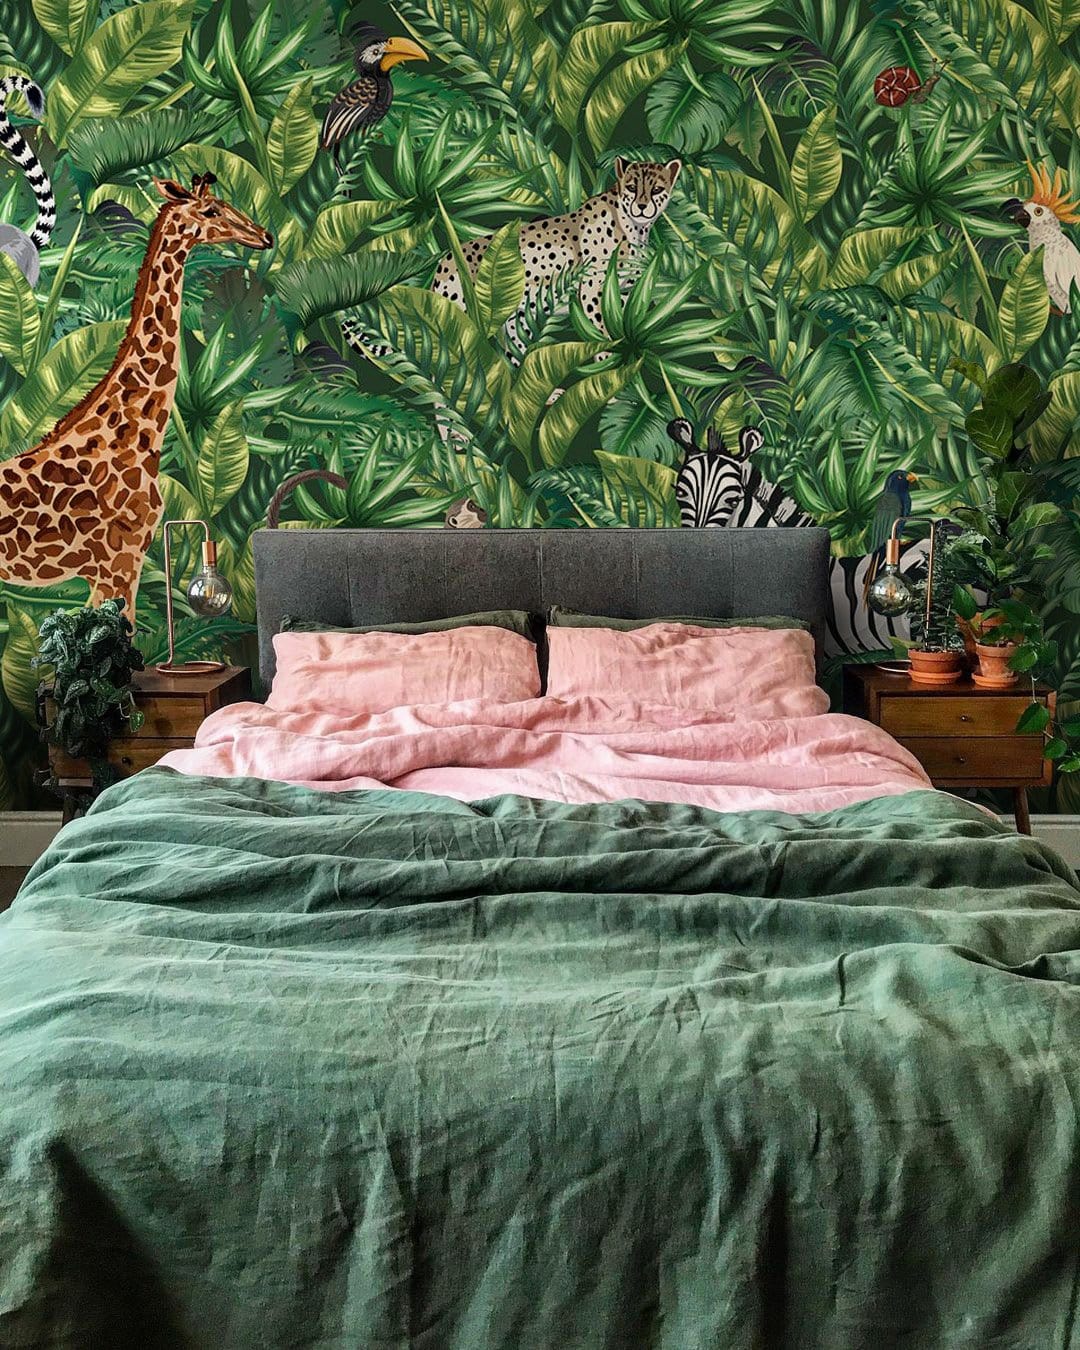 Animals from the Jungle Wallpaper Mural to Adorn Your Bedroom